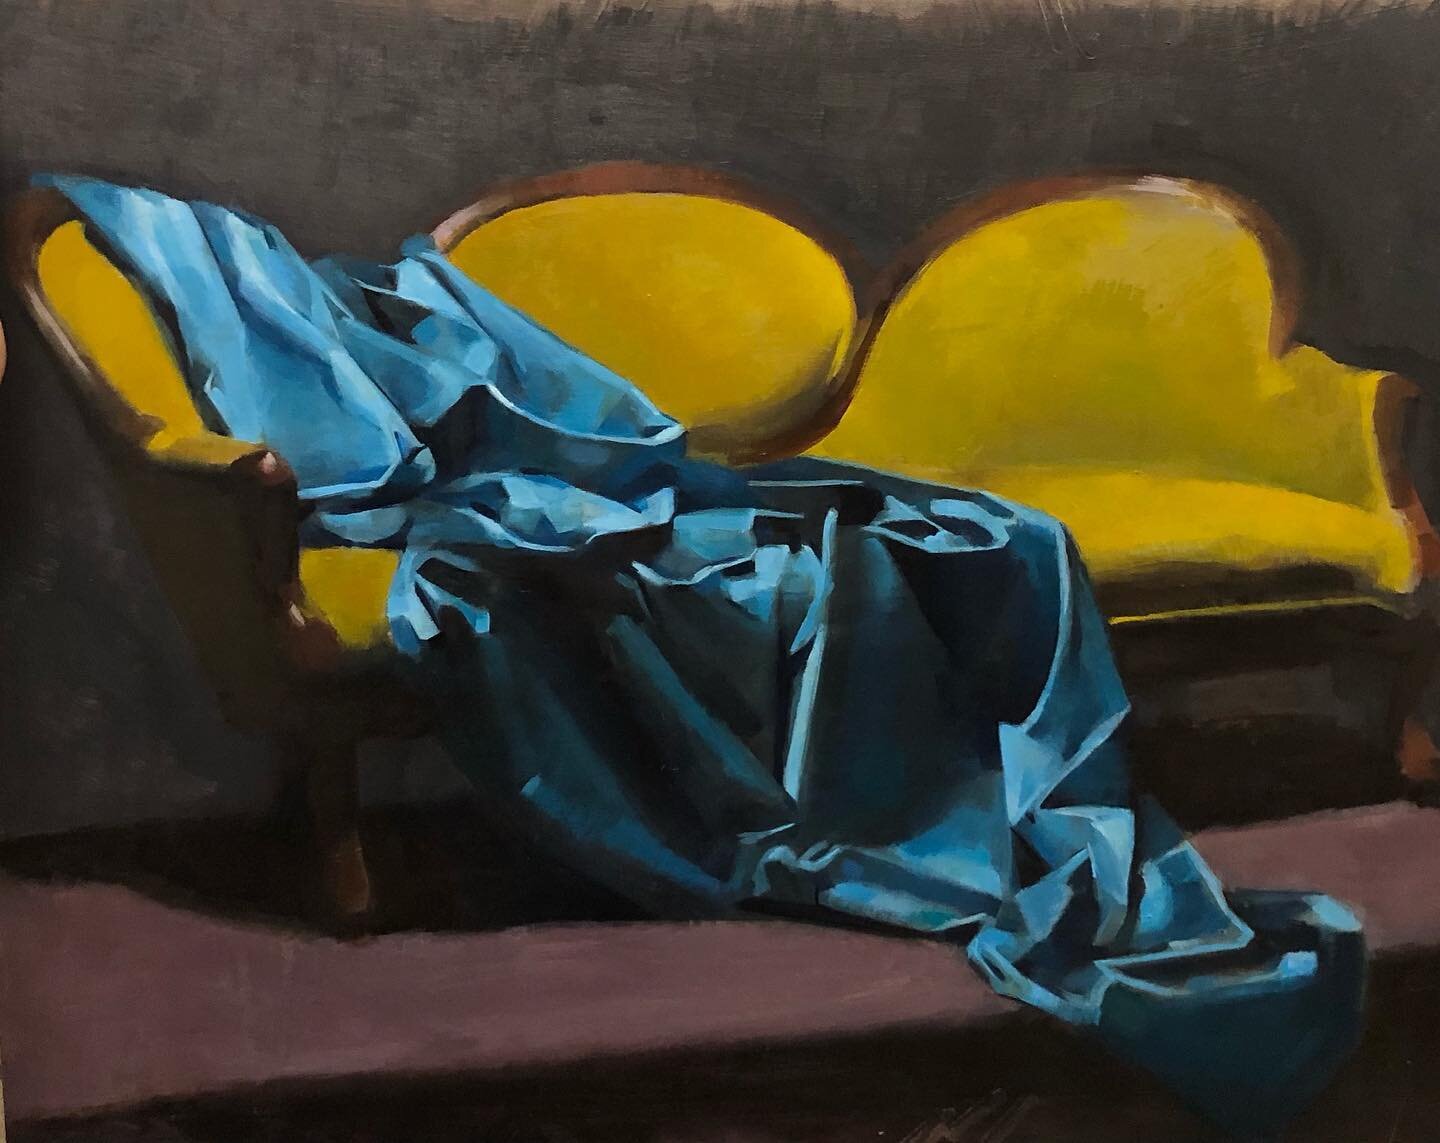 I&rsquo;ve been working out drape studies this summer. 

Larger compositions to come

#painting #art